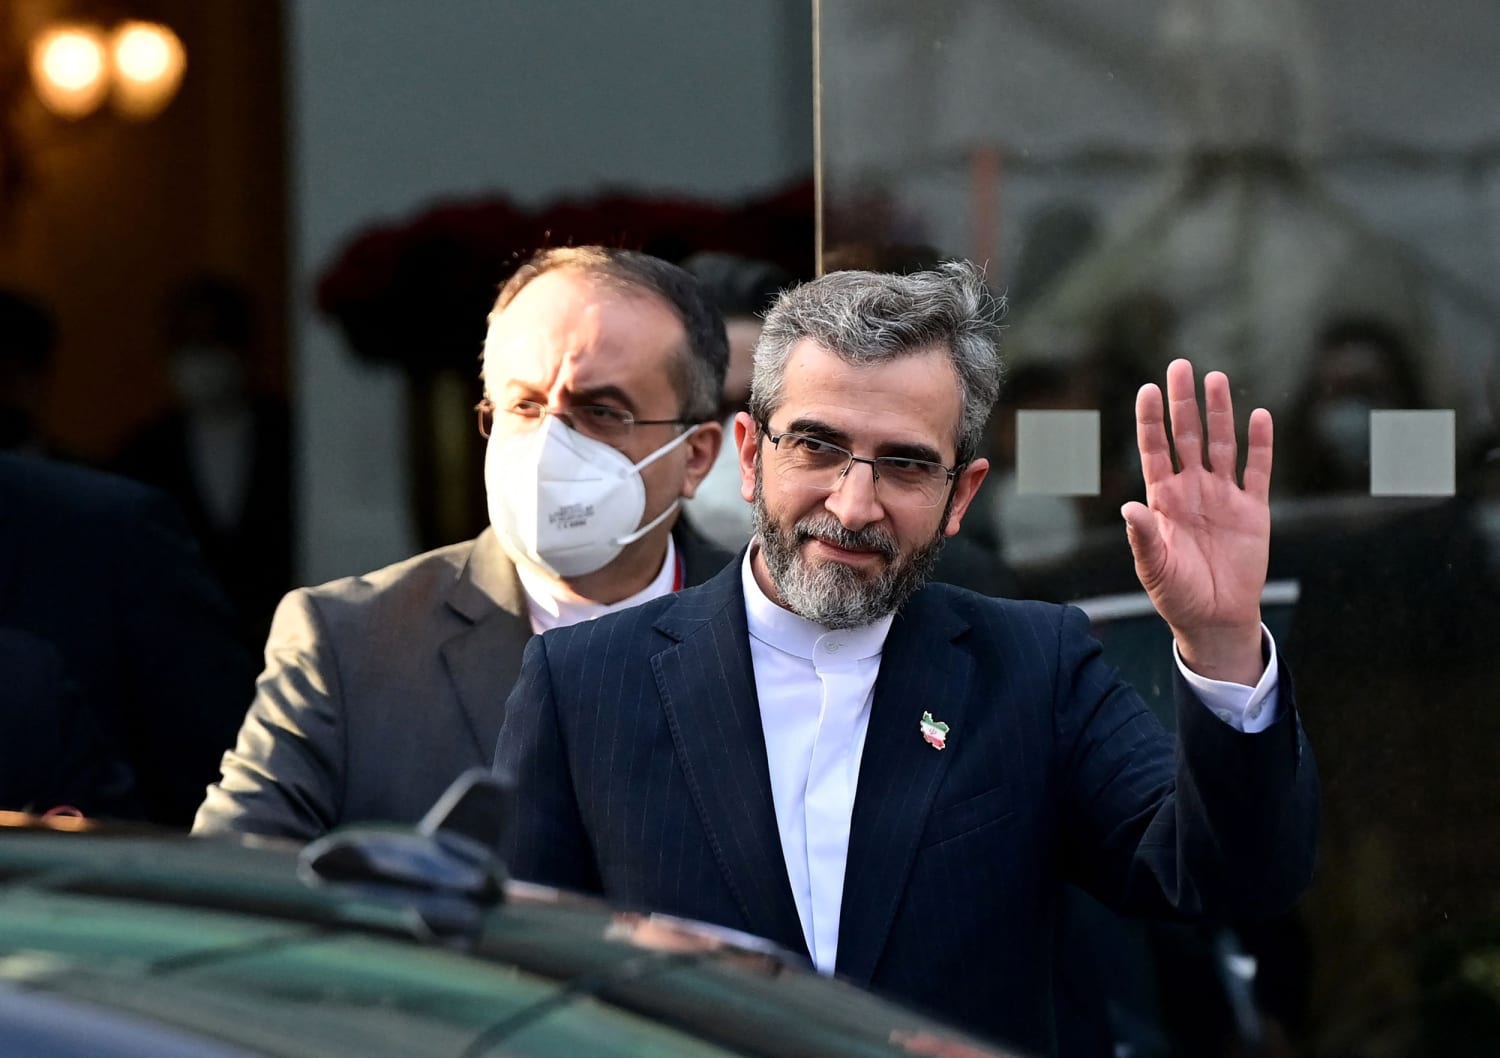 Iran-reneges-on-previous-concessions-in-nuclear-talks,-U.S.-official-says